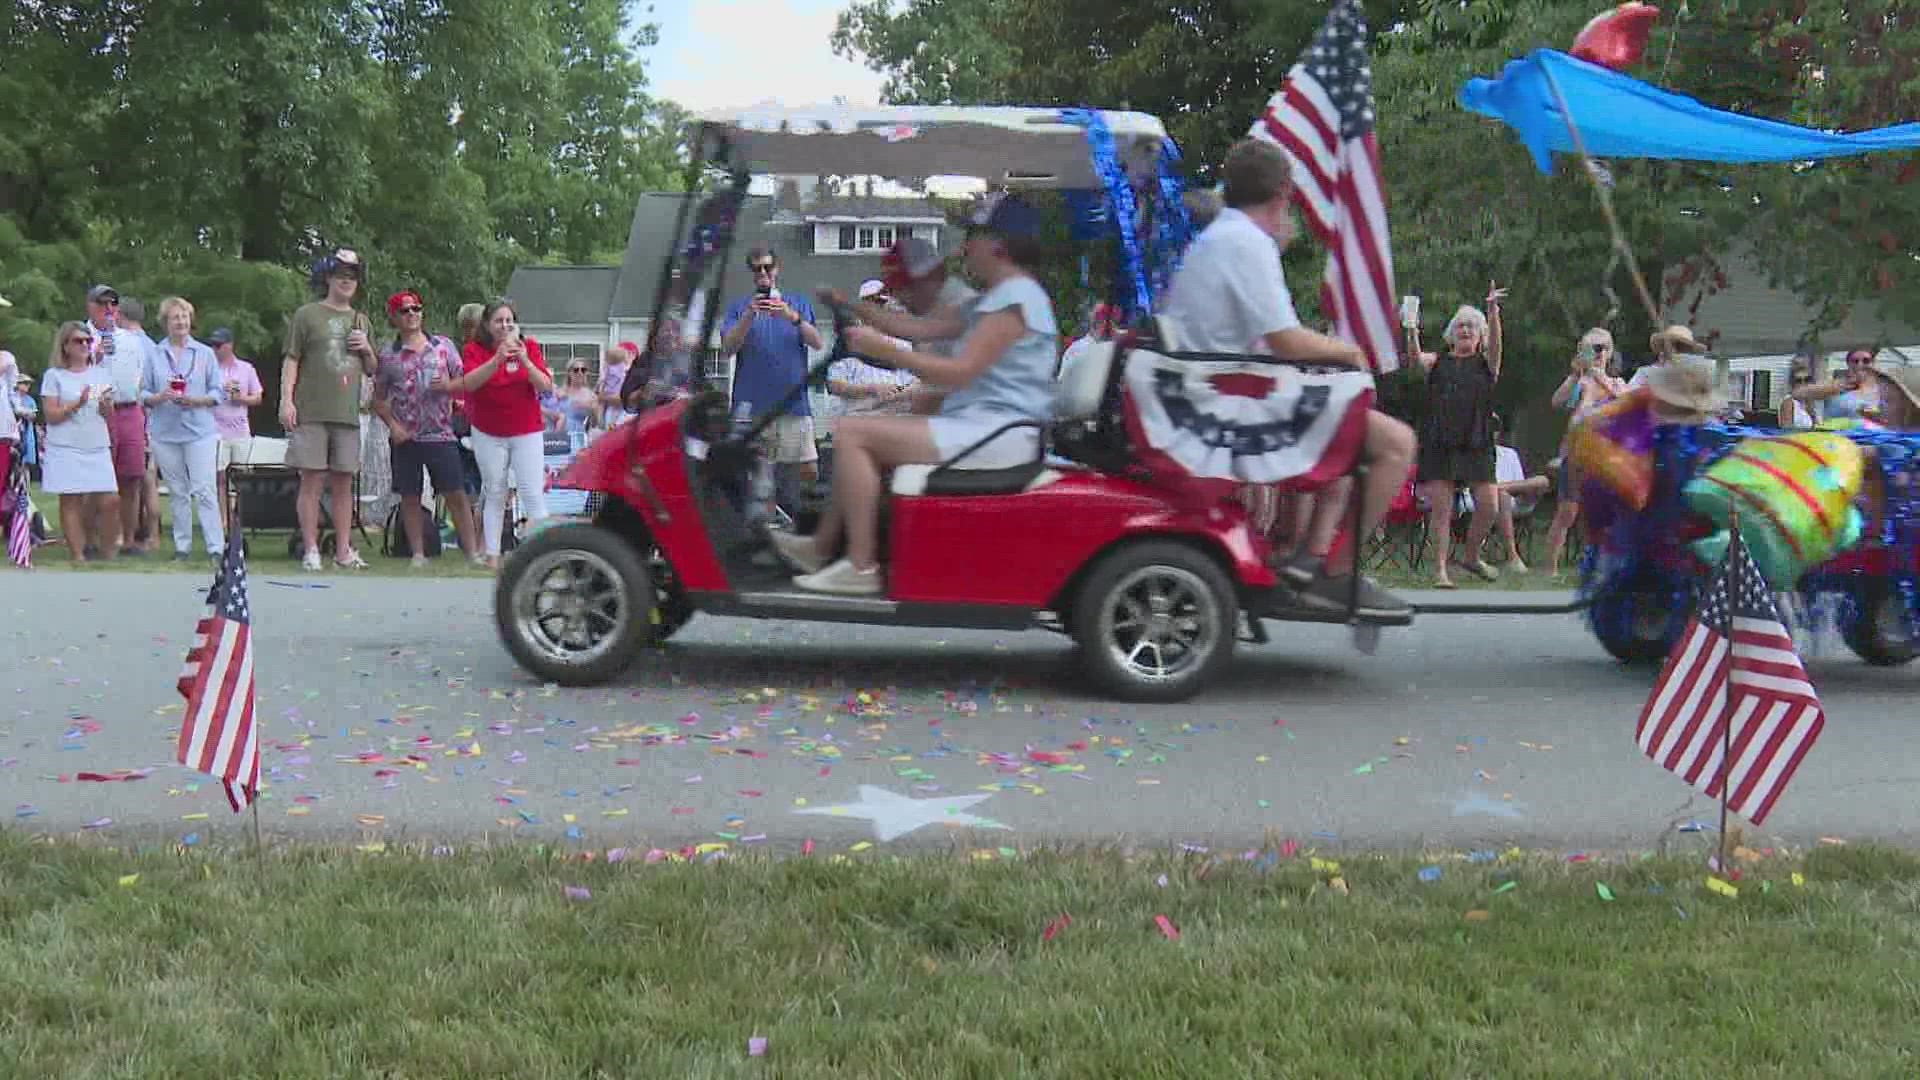 Families marched through the streets, celebrating Independence Day.